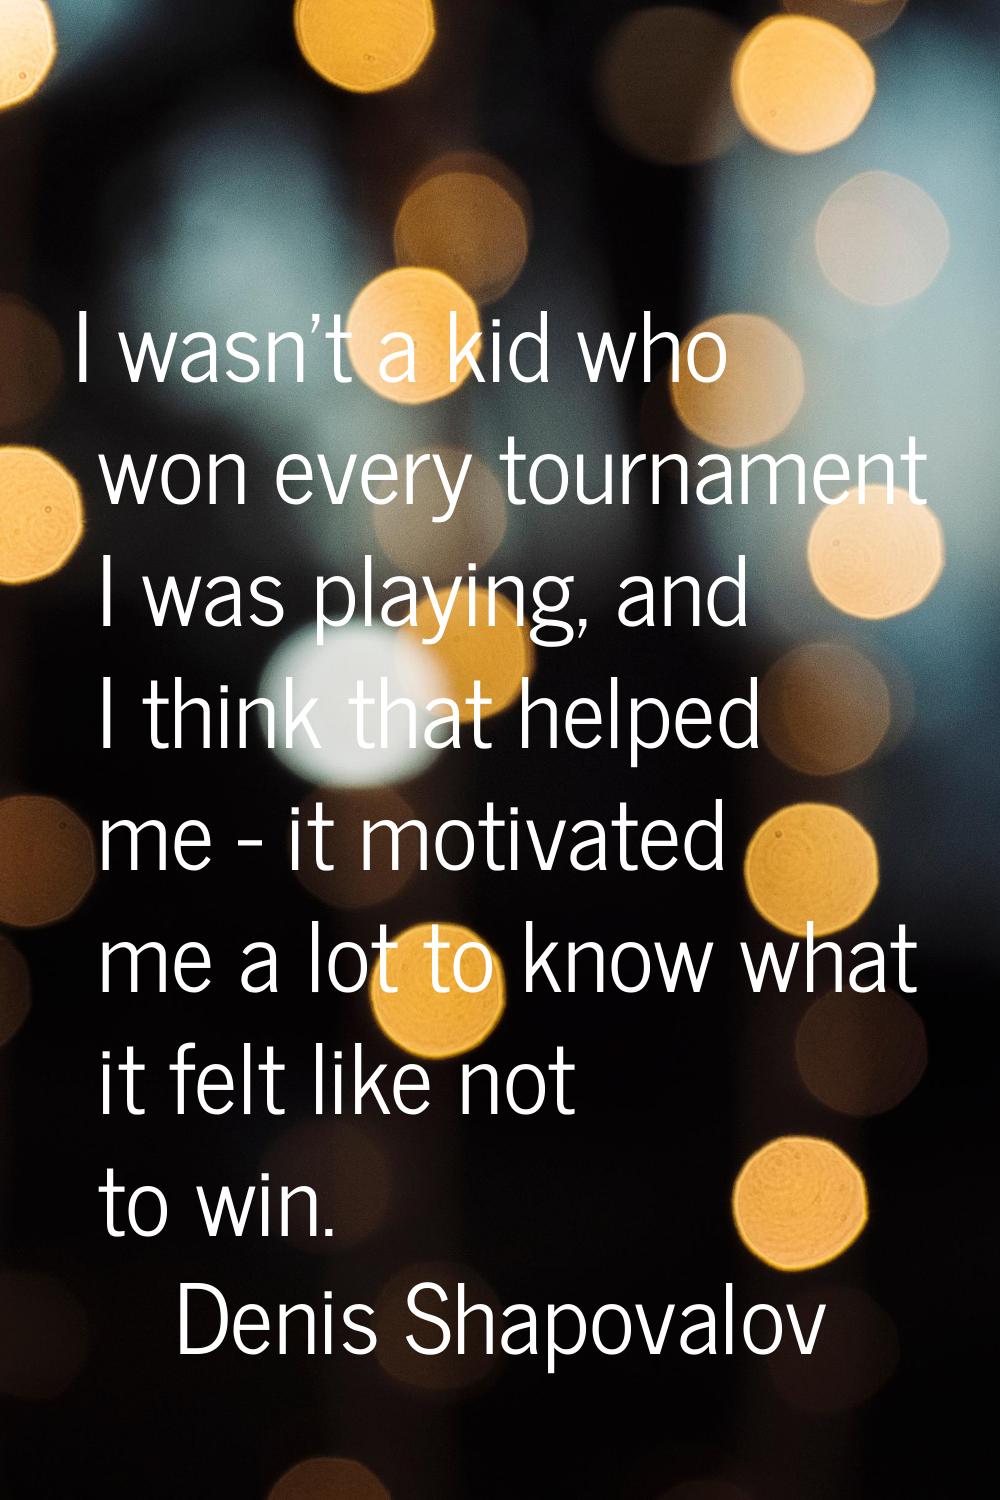 I wasn't a kid who won every tournament I was playing, and I think that helped me - it motivated me